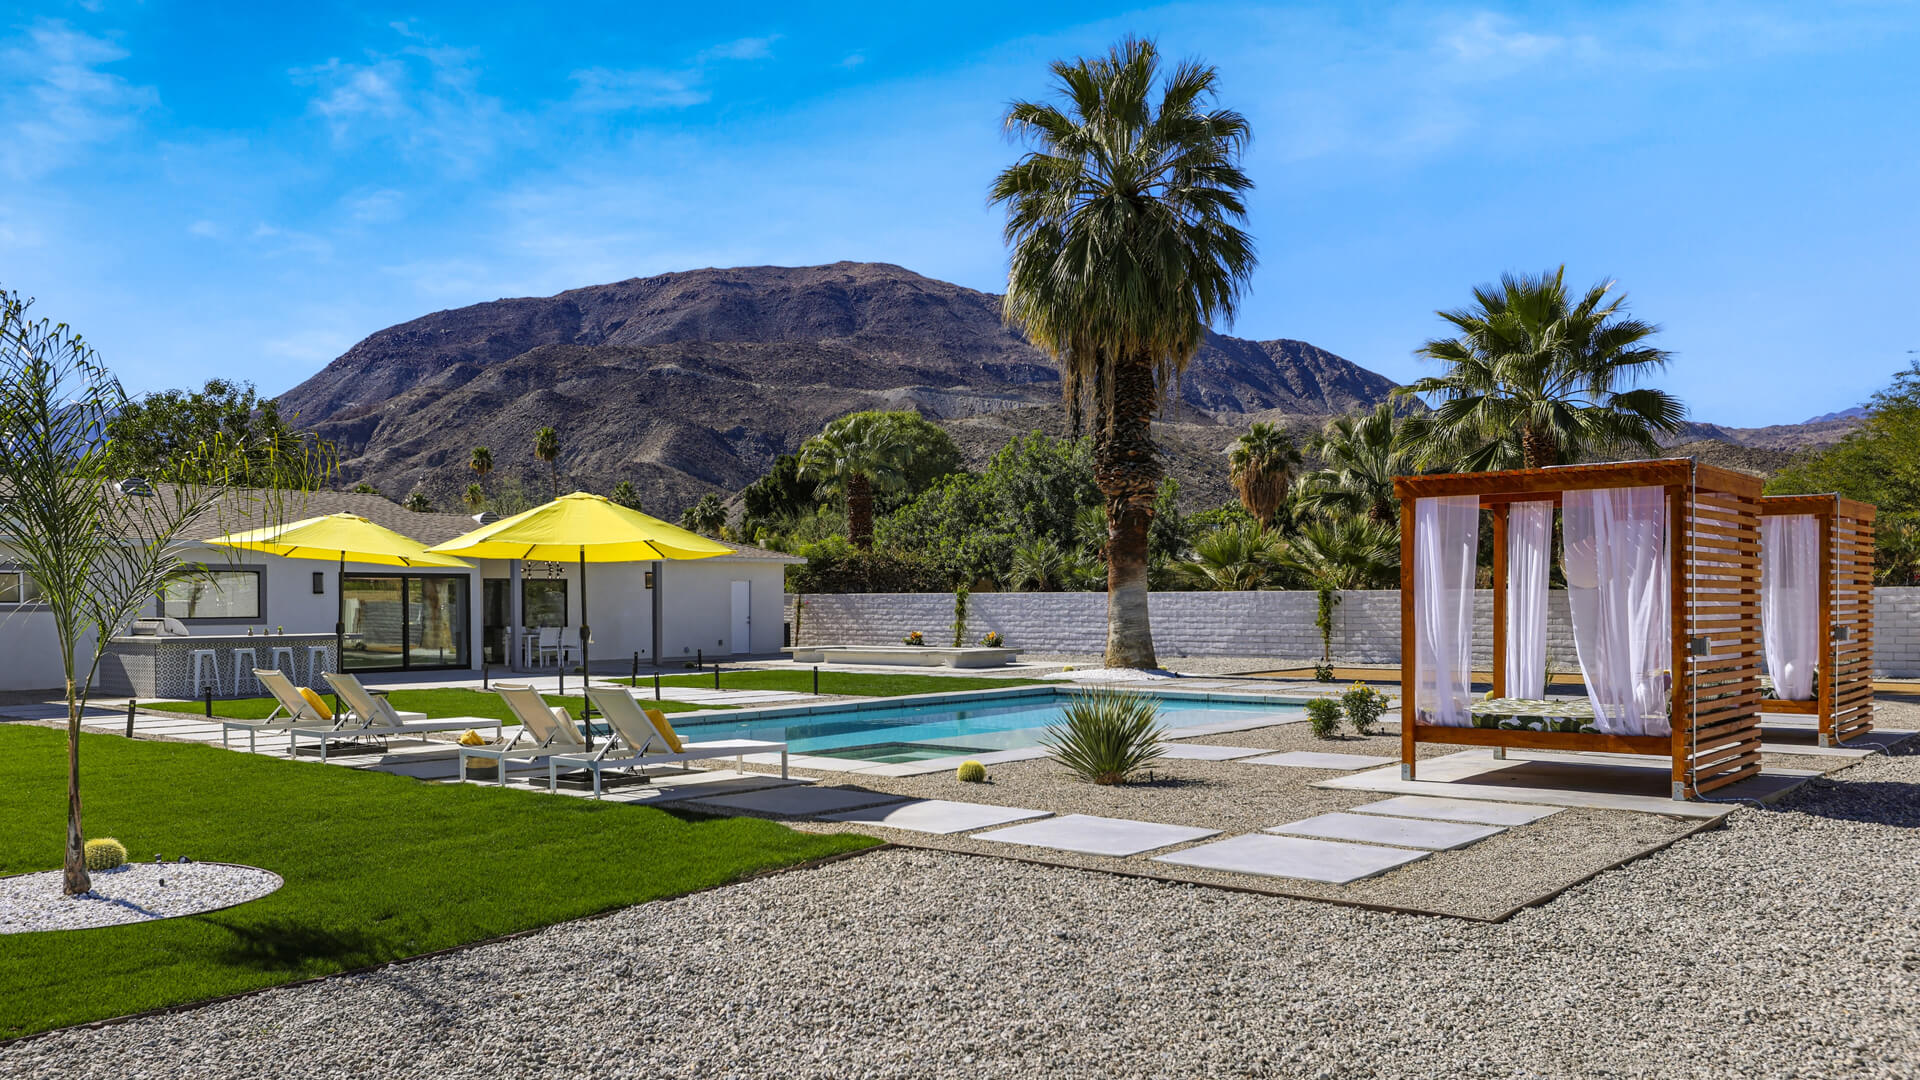 Featured homes for sale in Palm Springs, Cathedral City, Rancho Mirage, Palm Desert, Indian Wells, and La Quinta, California